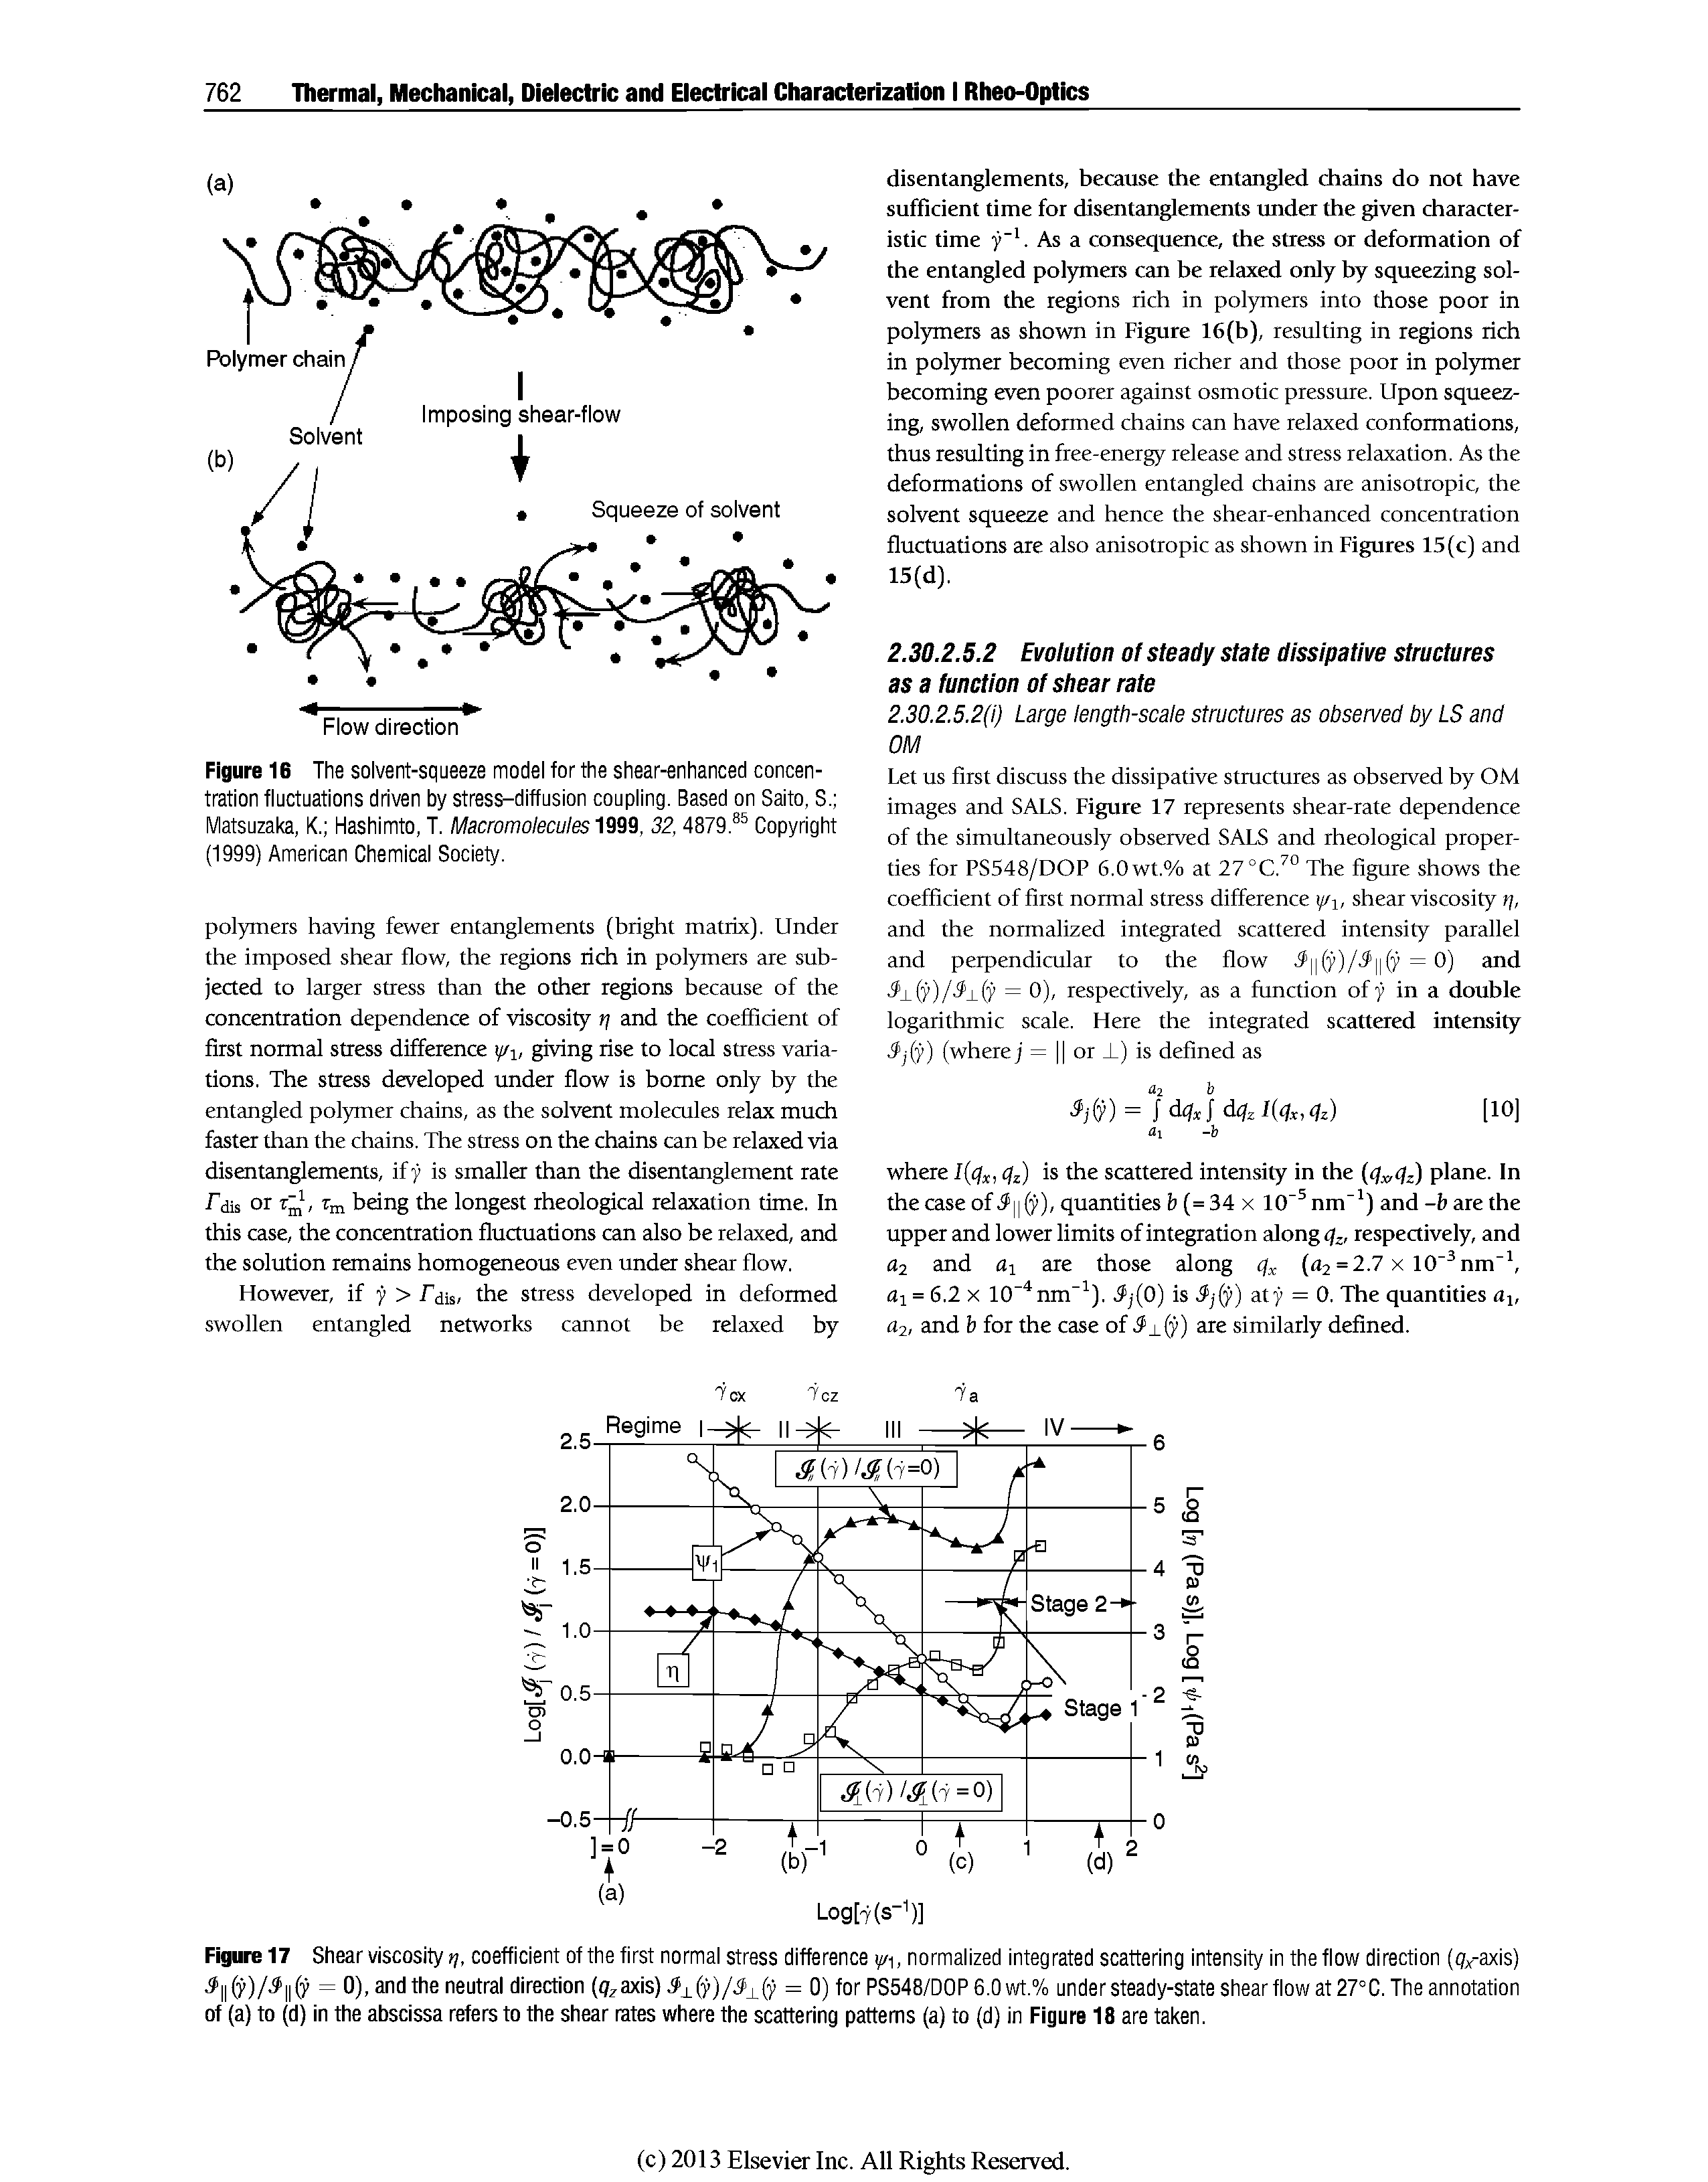 Figure 17 Shear viscosity /, coefficient of the first normal stress difference i, normalized integrated scattering intensity in the flow direction (f A axis) ll(y)/ ll(y = 0), and the neutral direction ( y axis) = 0) for PS548/D0P 6.0wt.% under steady-state shear flow at 27°C. The annotation...